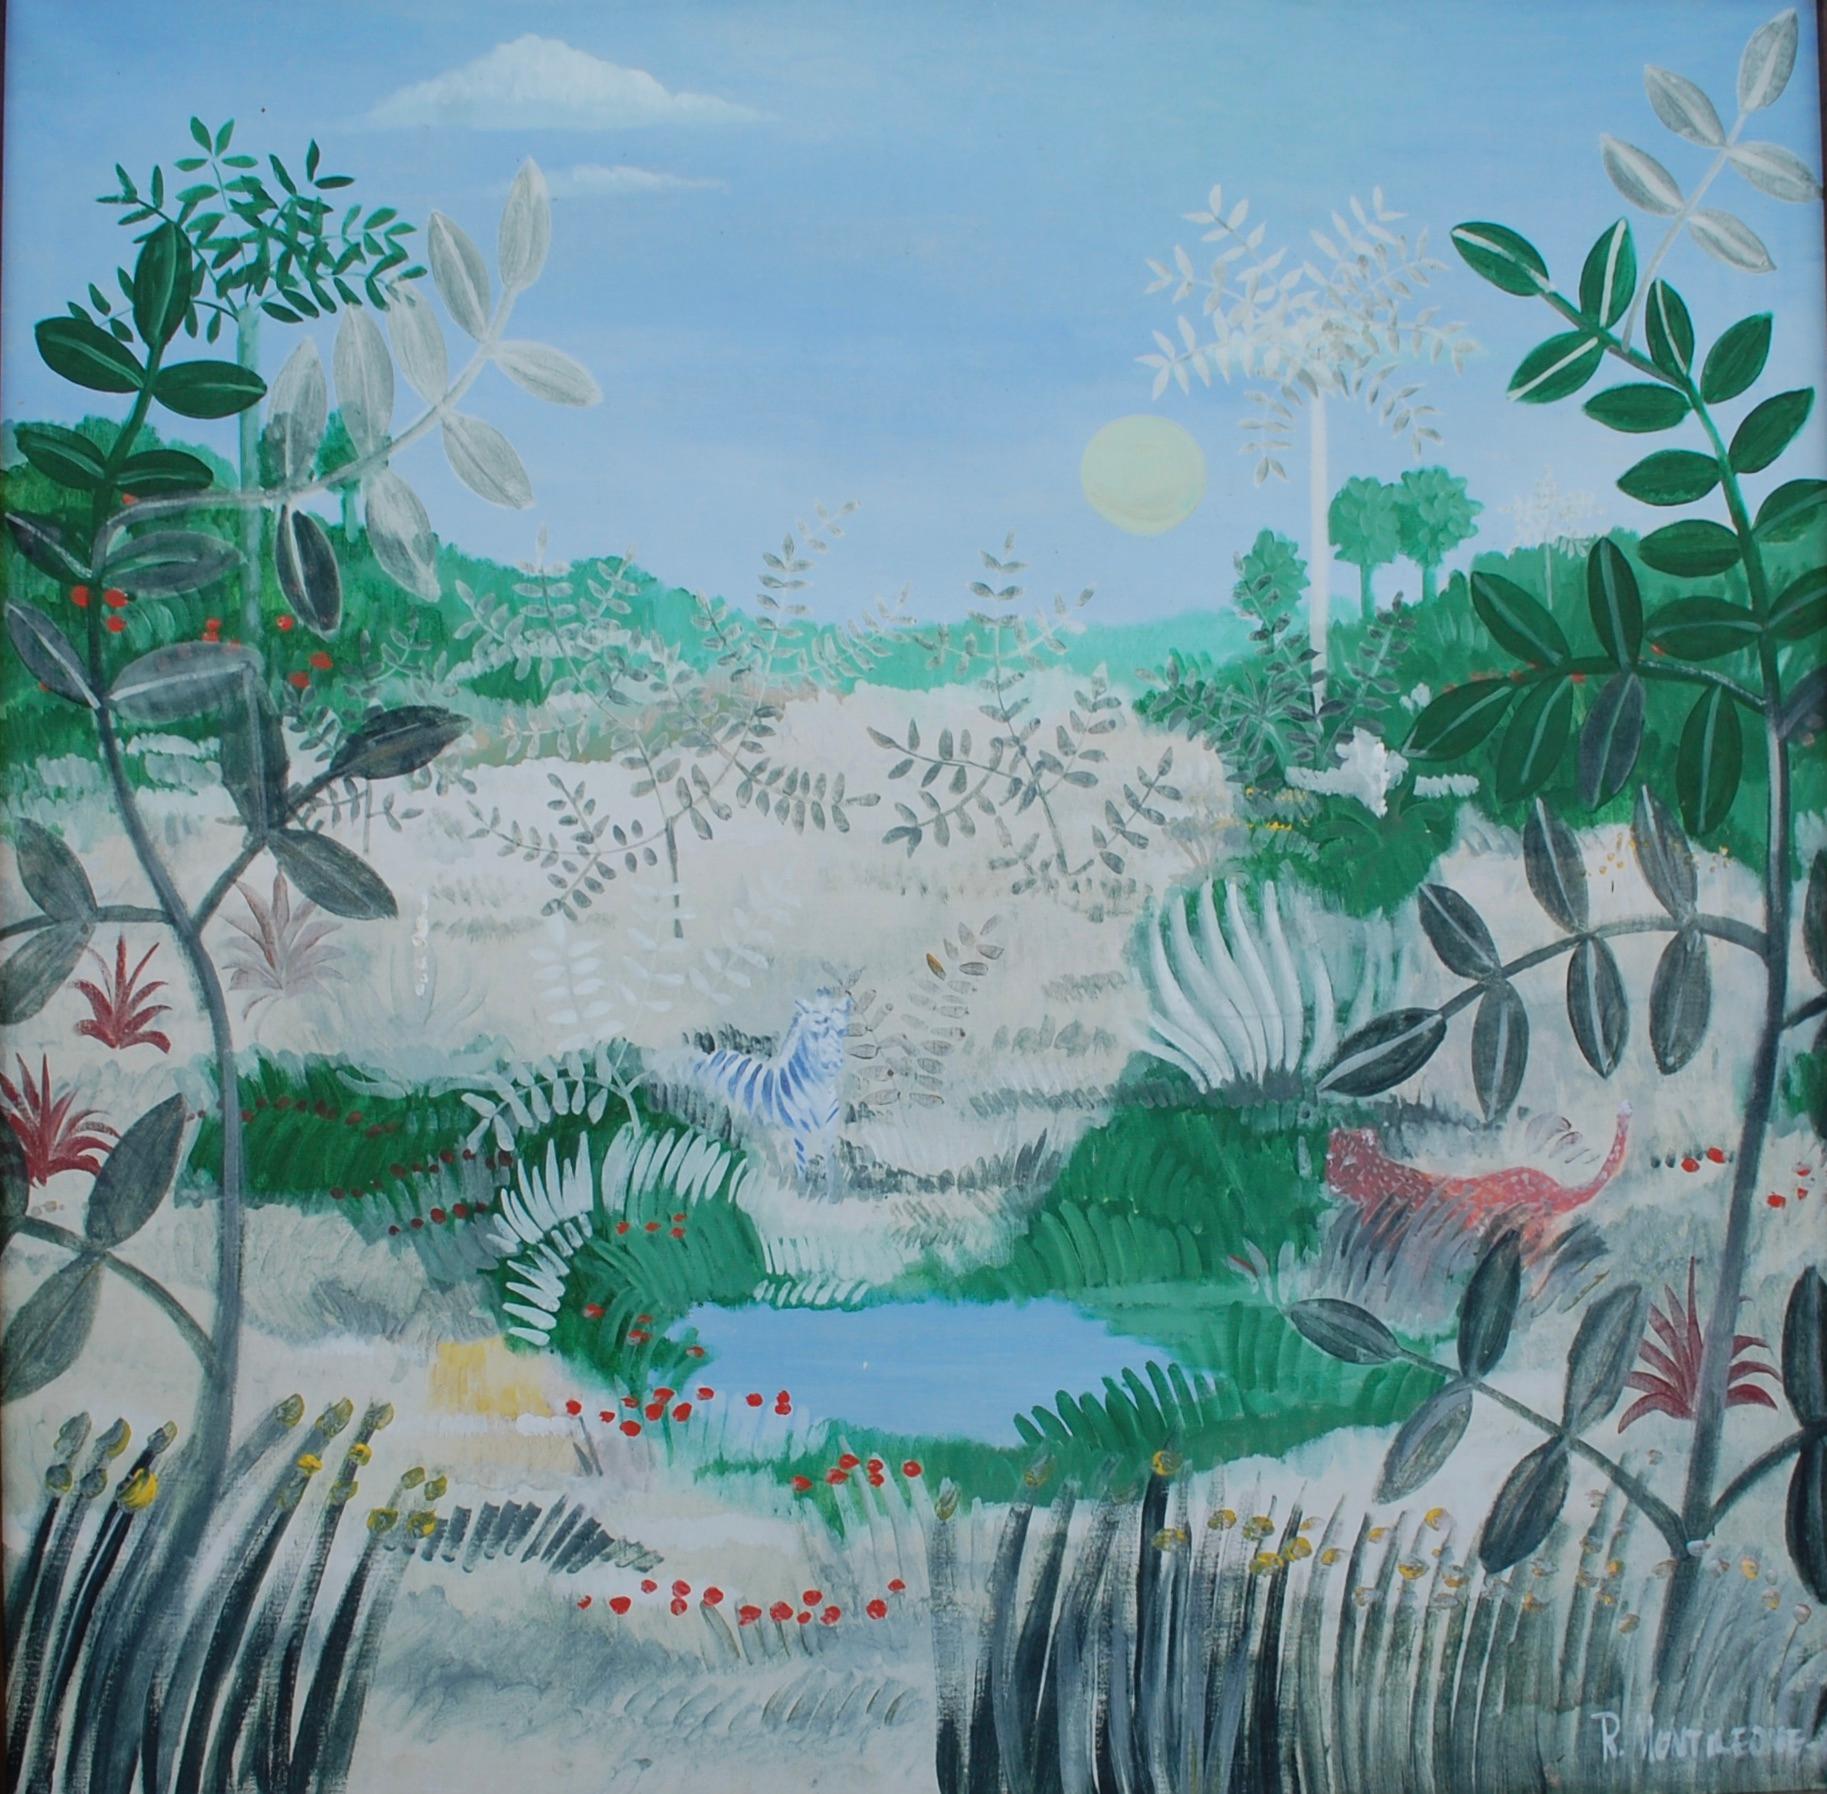 Jungle with Tiger,
Large exotic oil on canvas in the style of Henri Rousseau paintings, about 1970s signed R. Montileone. 
Canvas 48x48 with frame 56x56